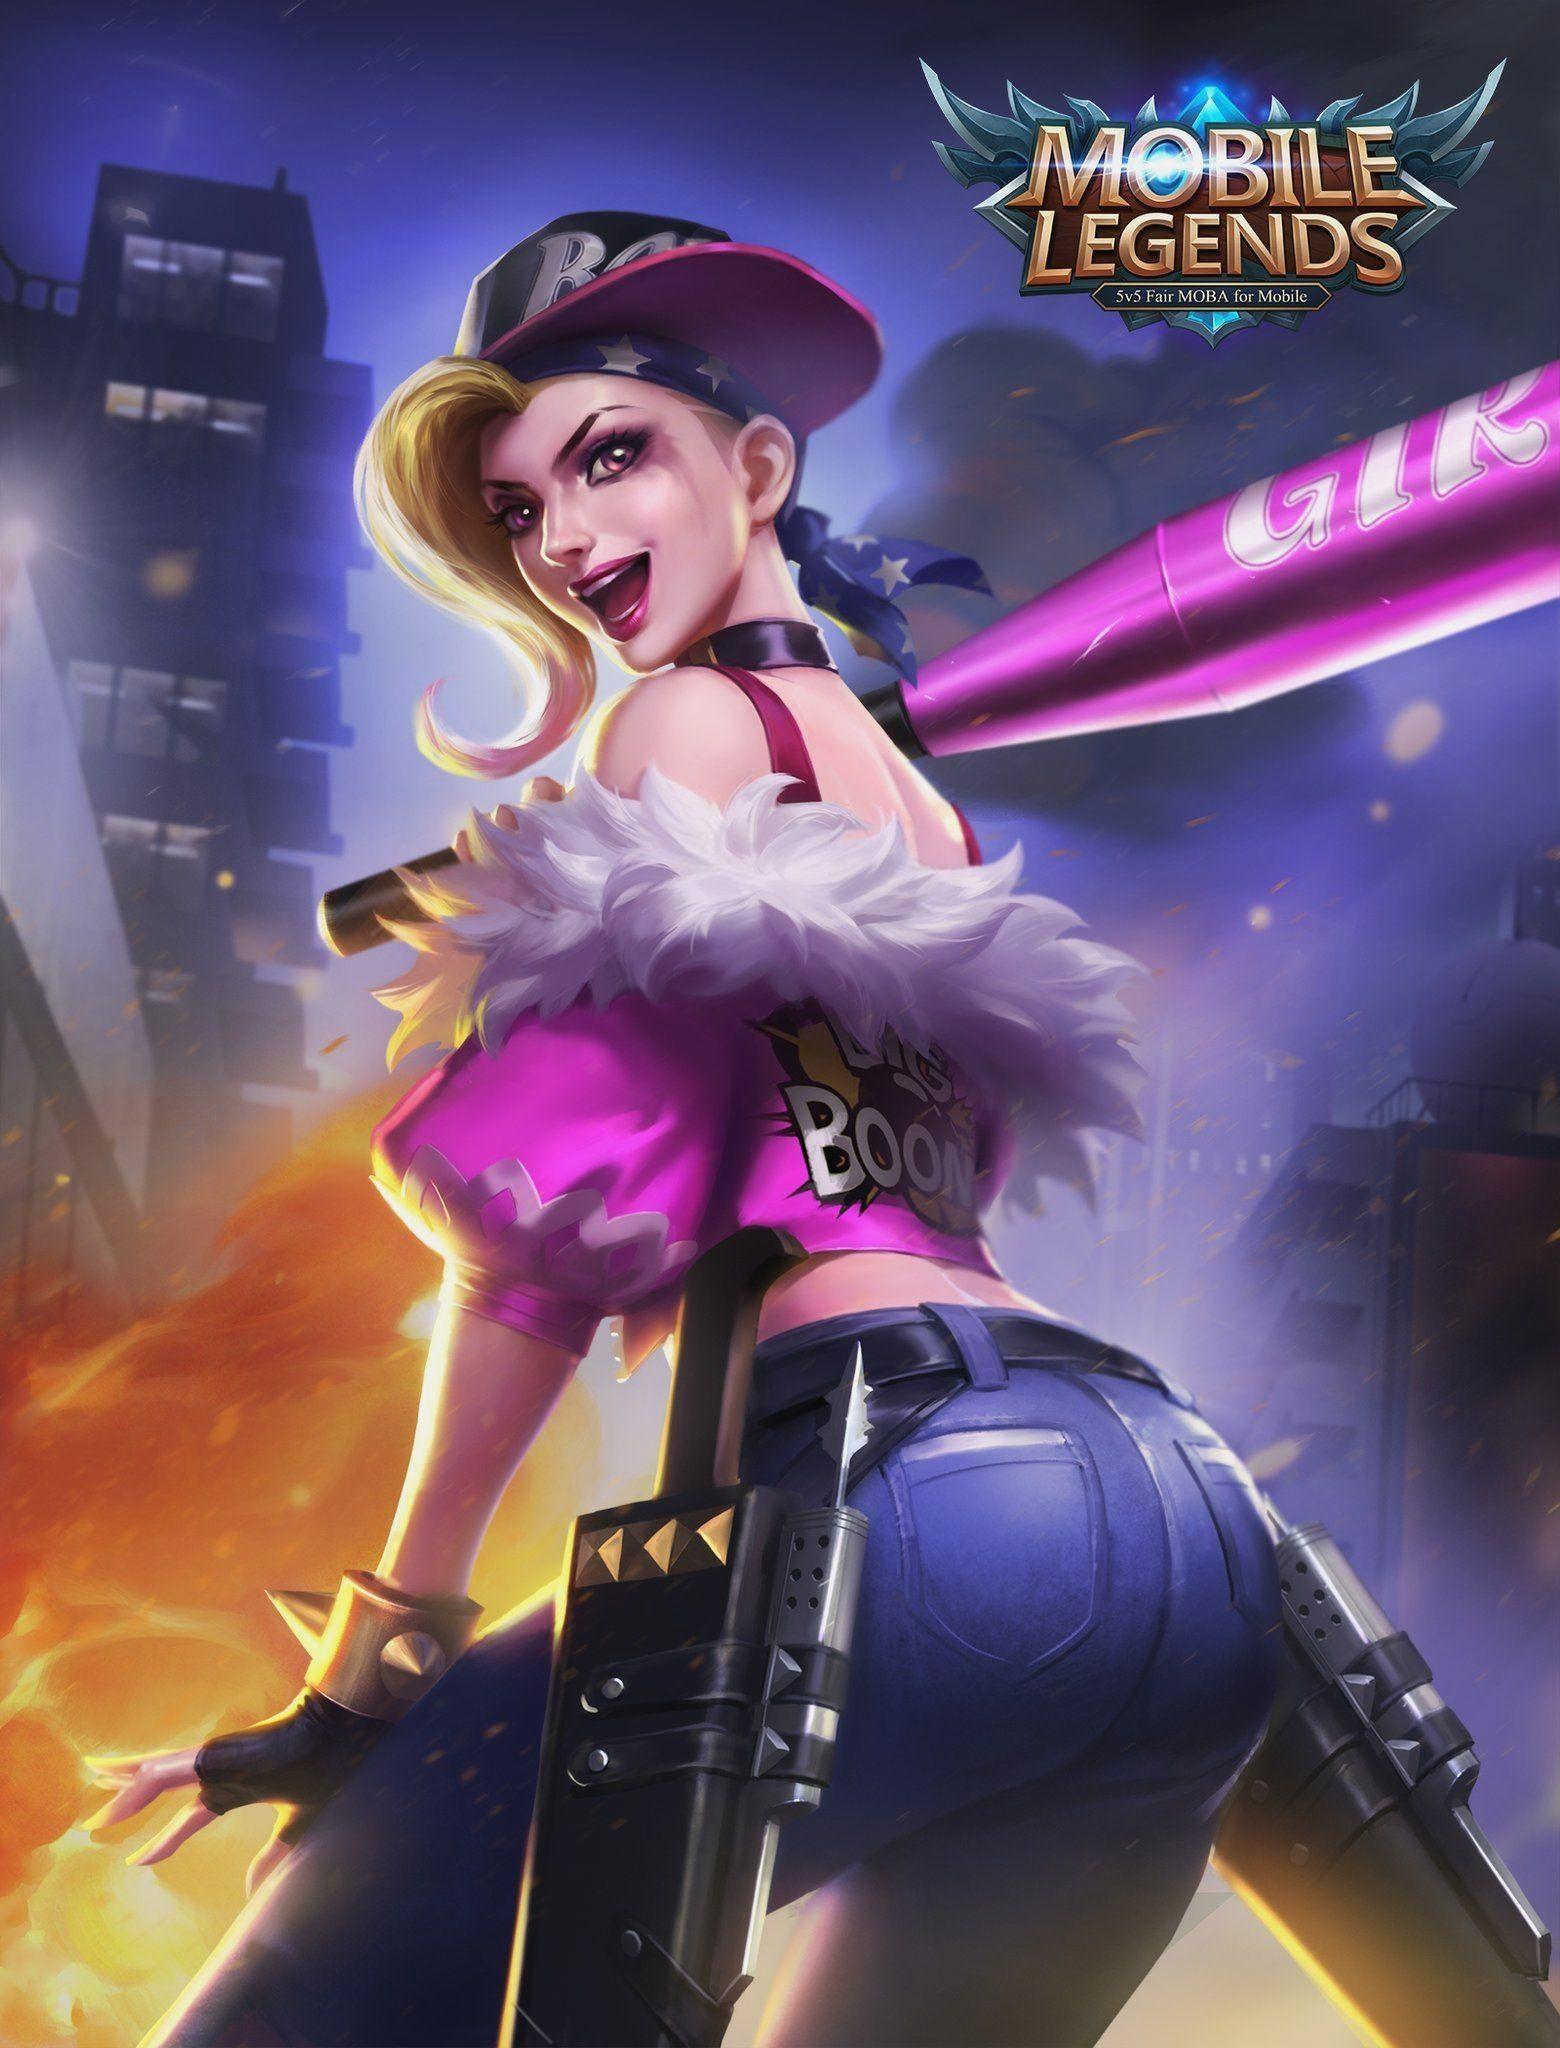 Chou Mobile Legends Wallpapers - Top Free Chou Mobile Legends